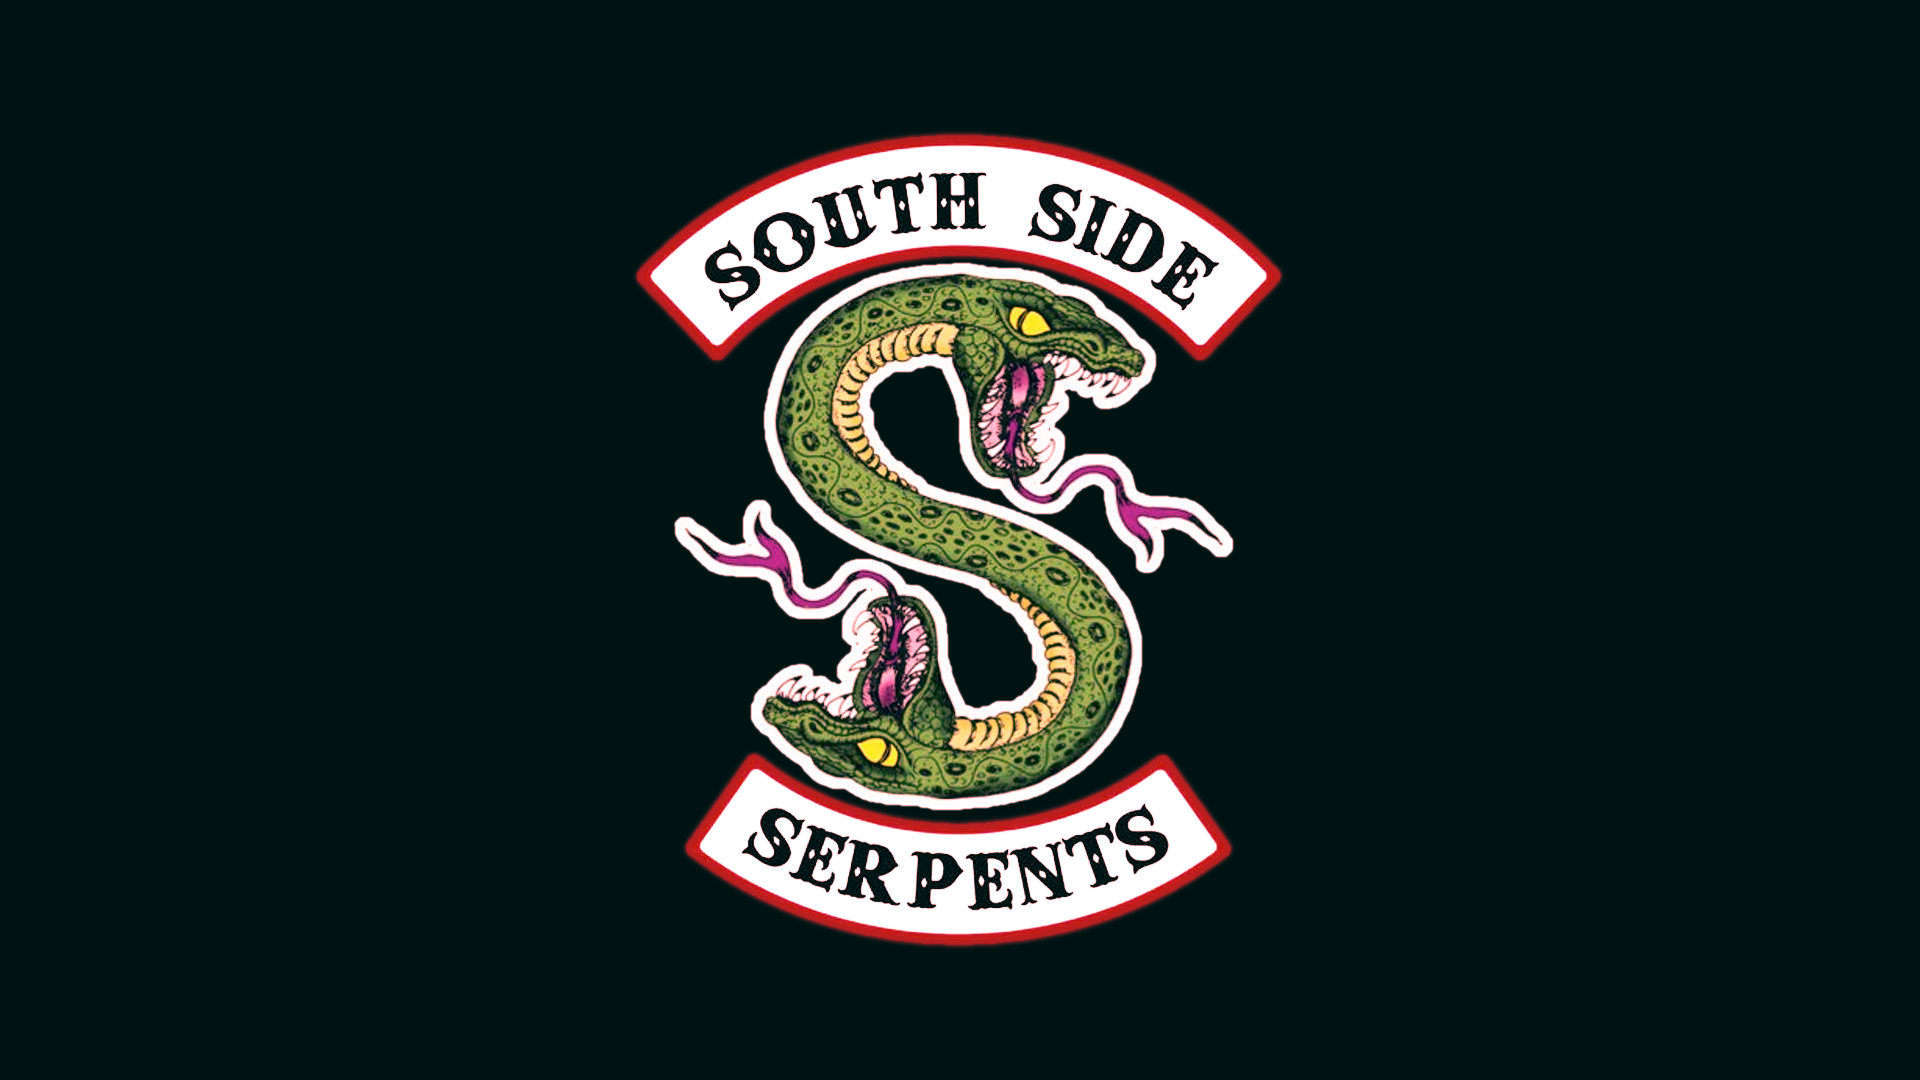 I made a South Side Serpents desktop wallpaper for you guys